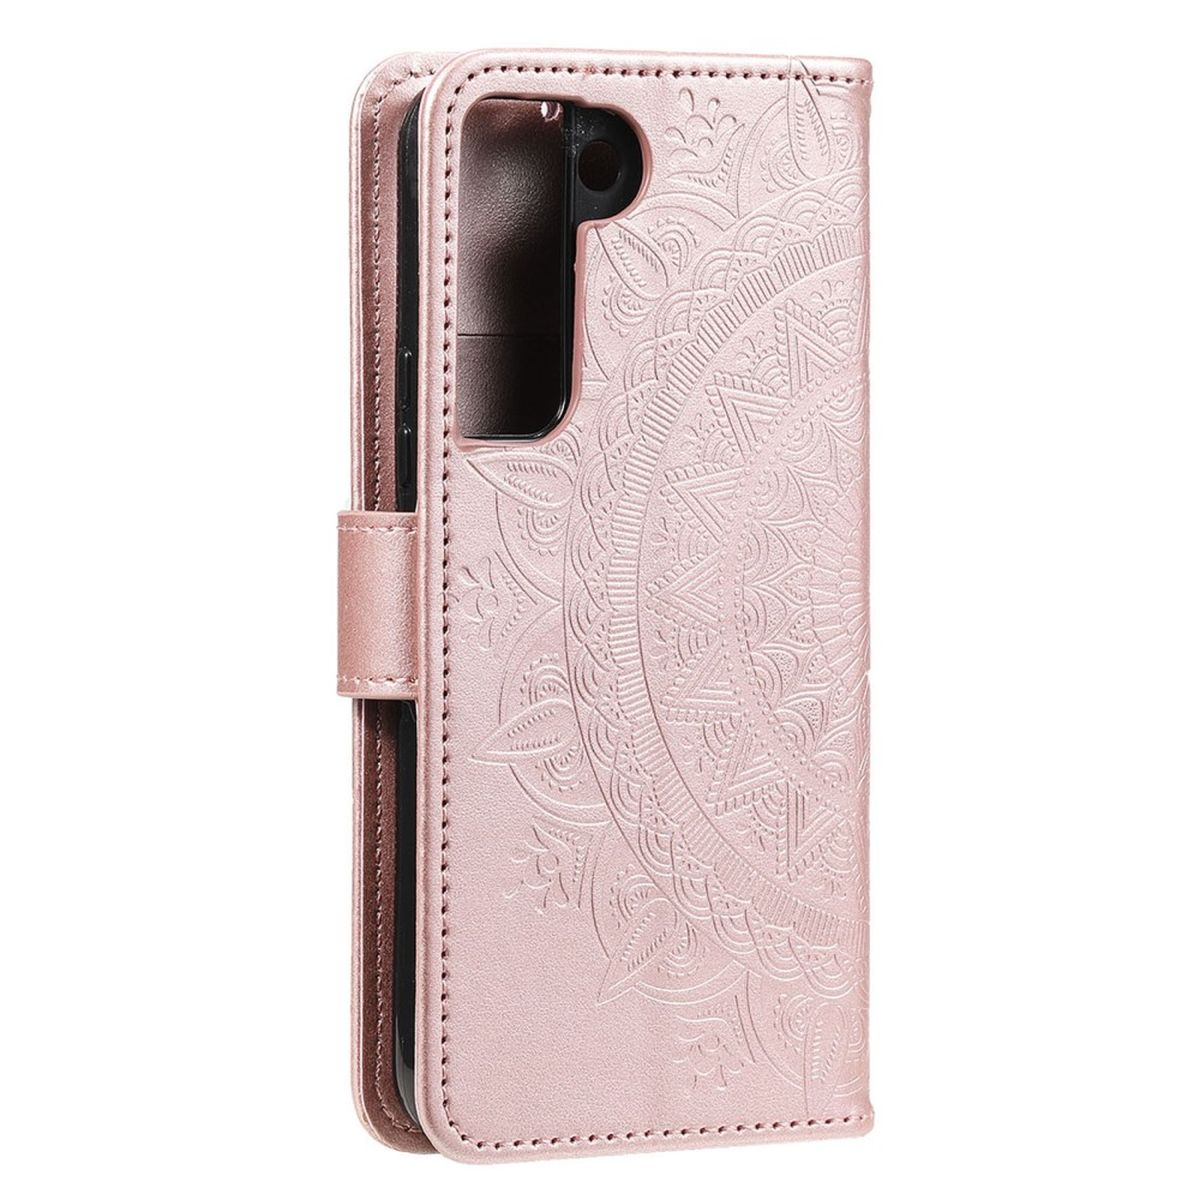 S22 Galaxy Muster, Mandala Samsung, Klapphülle Rosegold Bookcover, COVERKINGZ 5G, mit